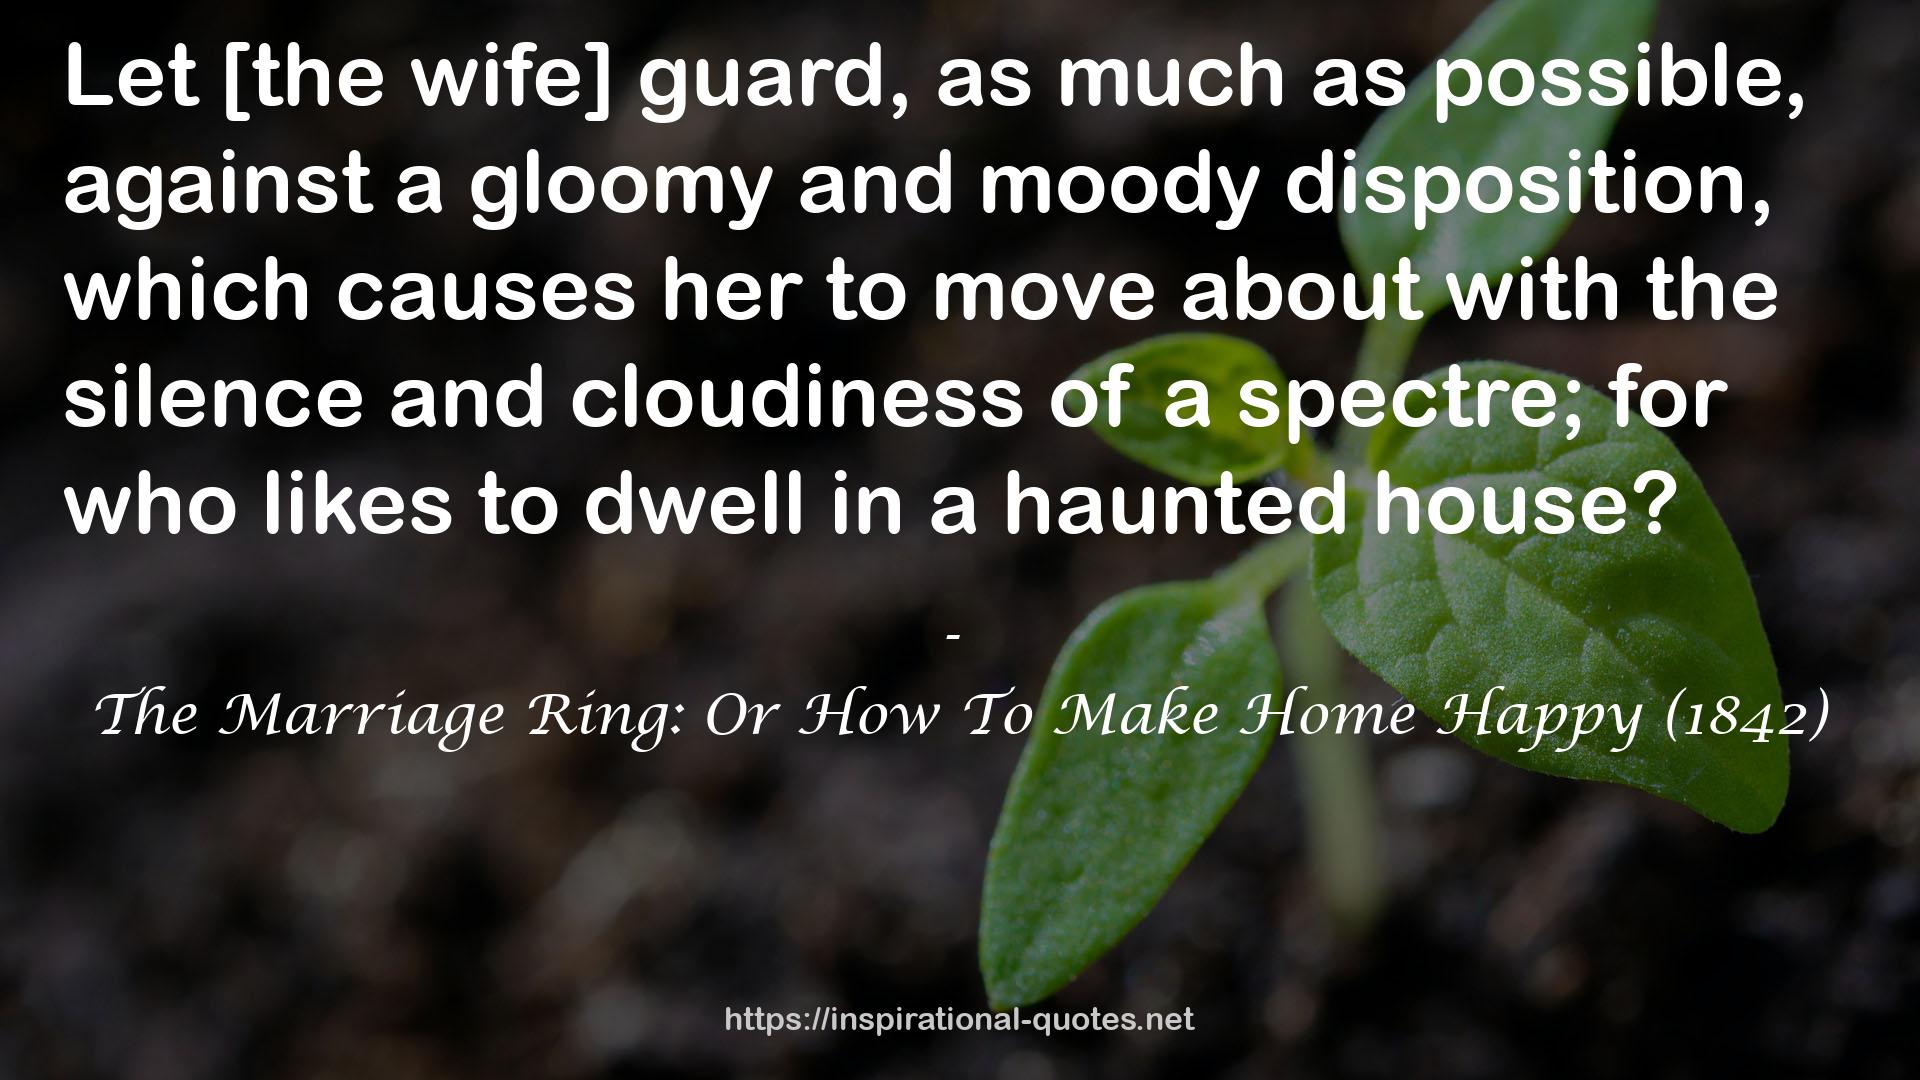 The Marriage Ring: Or How To Make Home Happy (1842) QUOTES